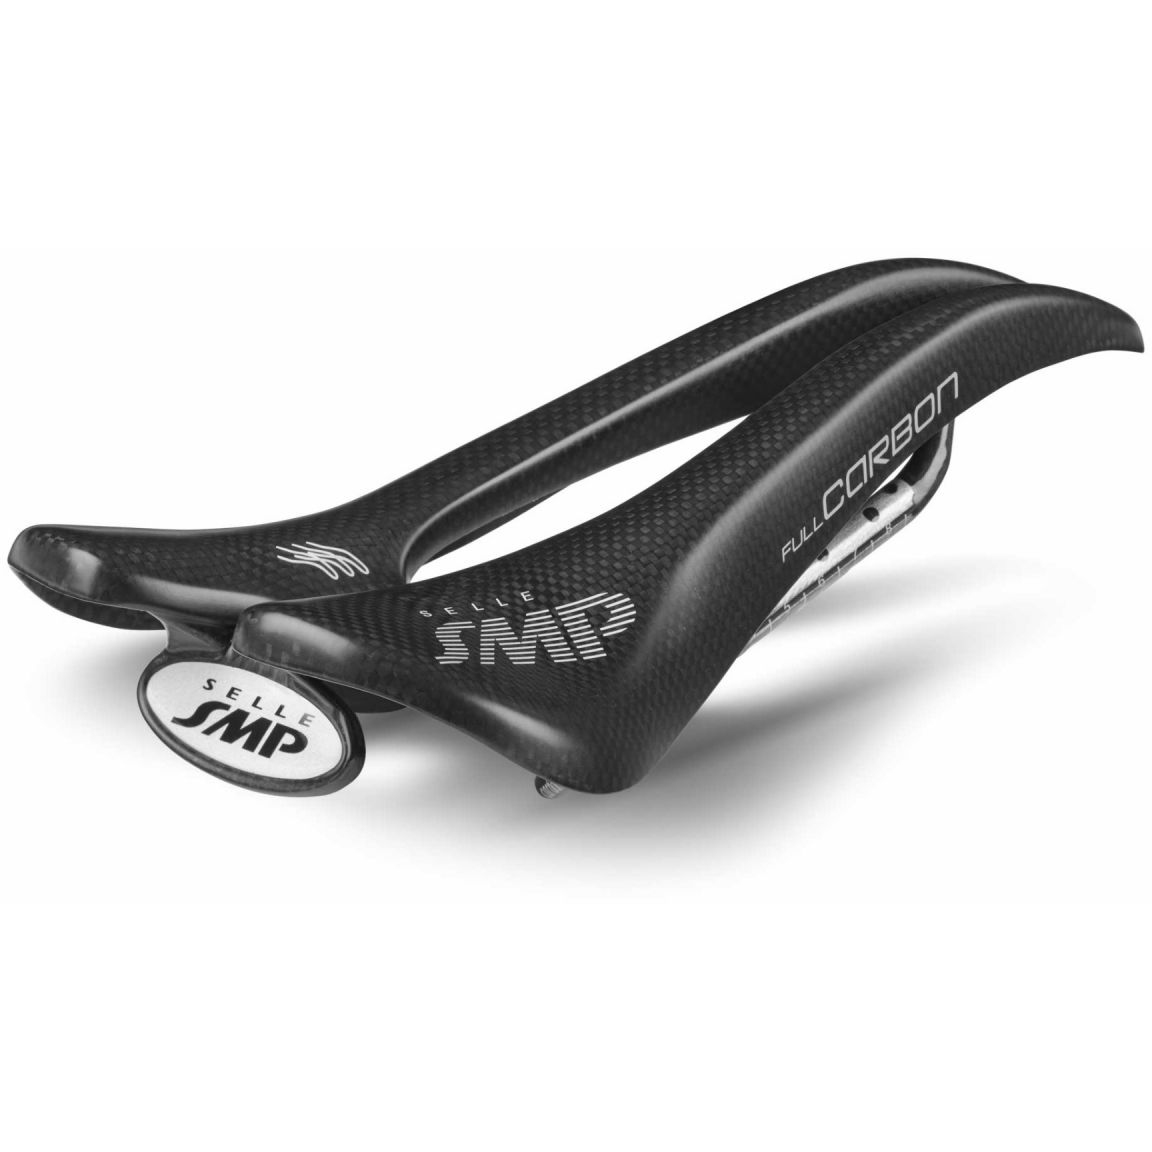 Picture of Selle SMP Full Carbon Saddle